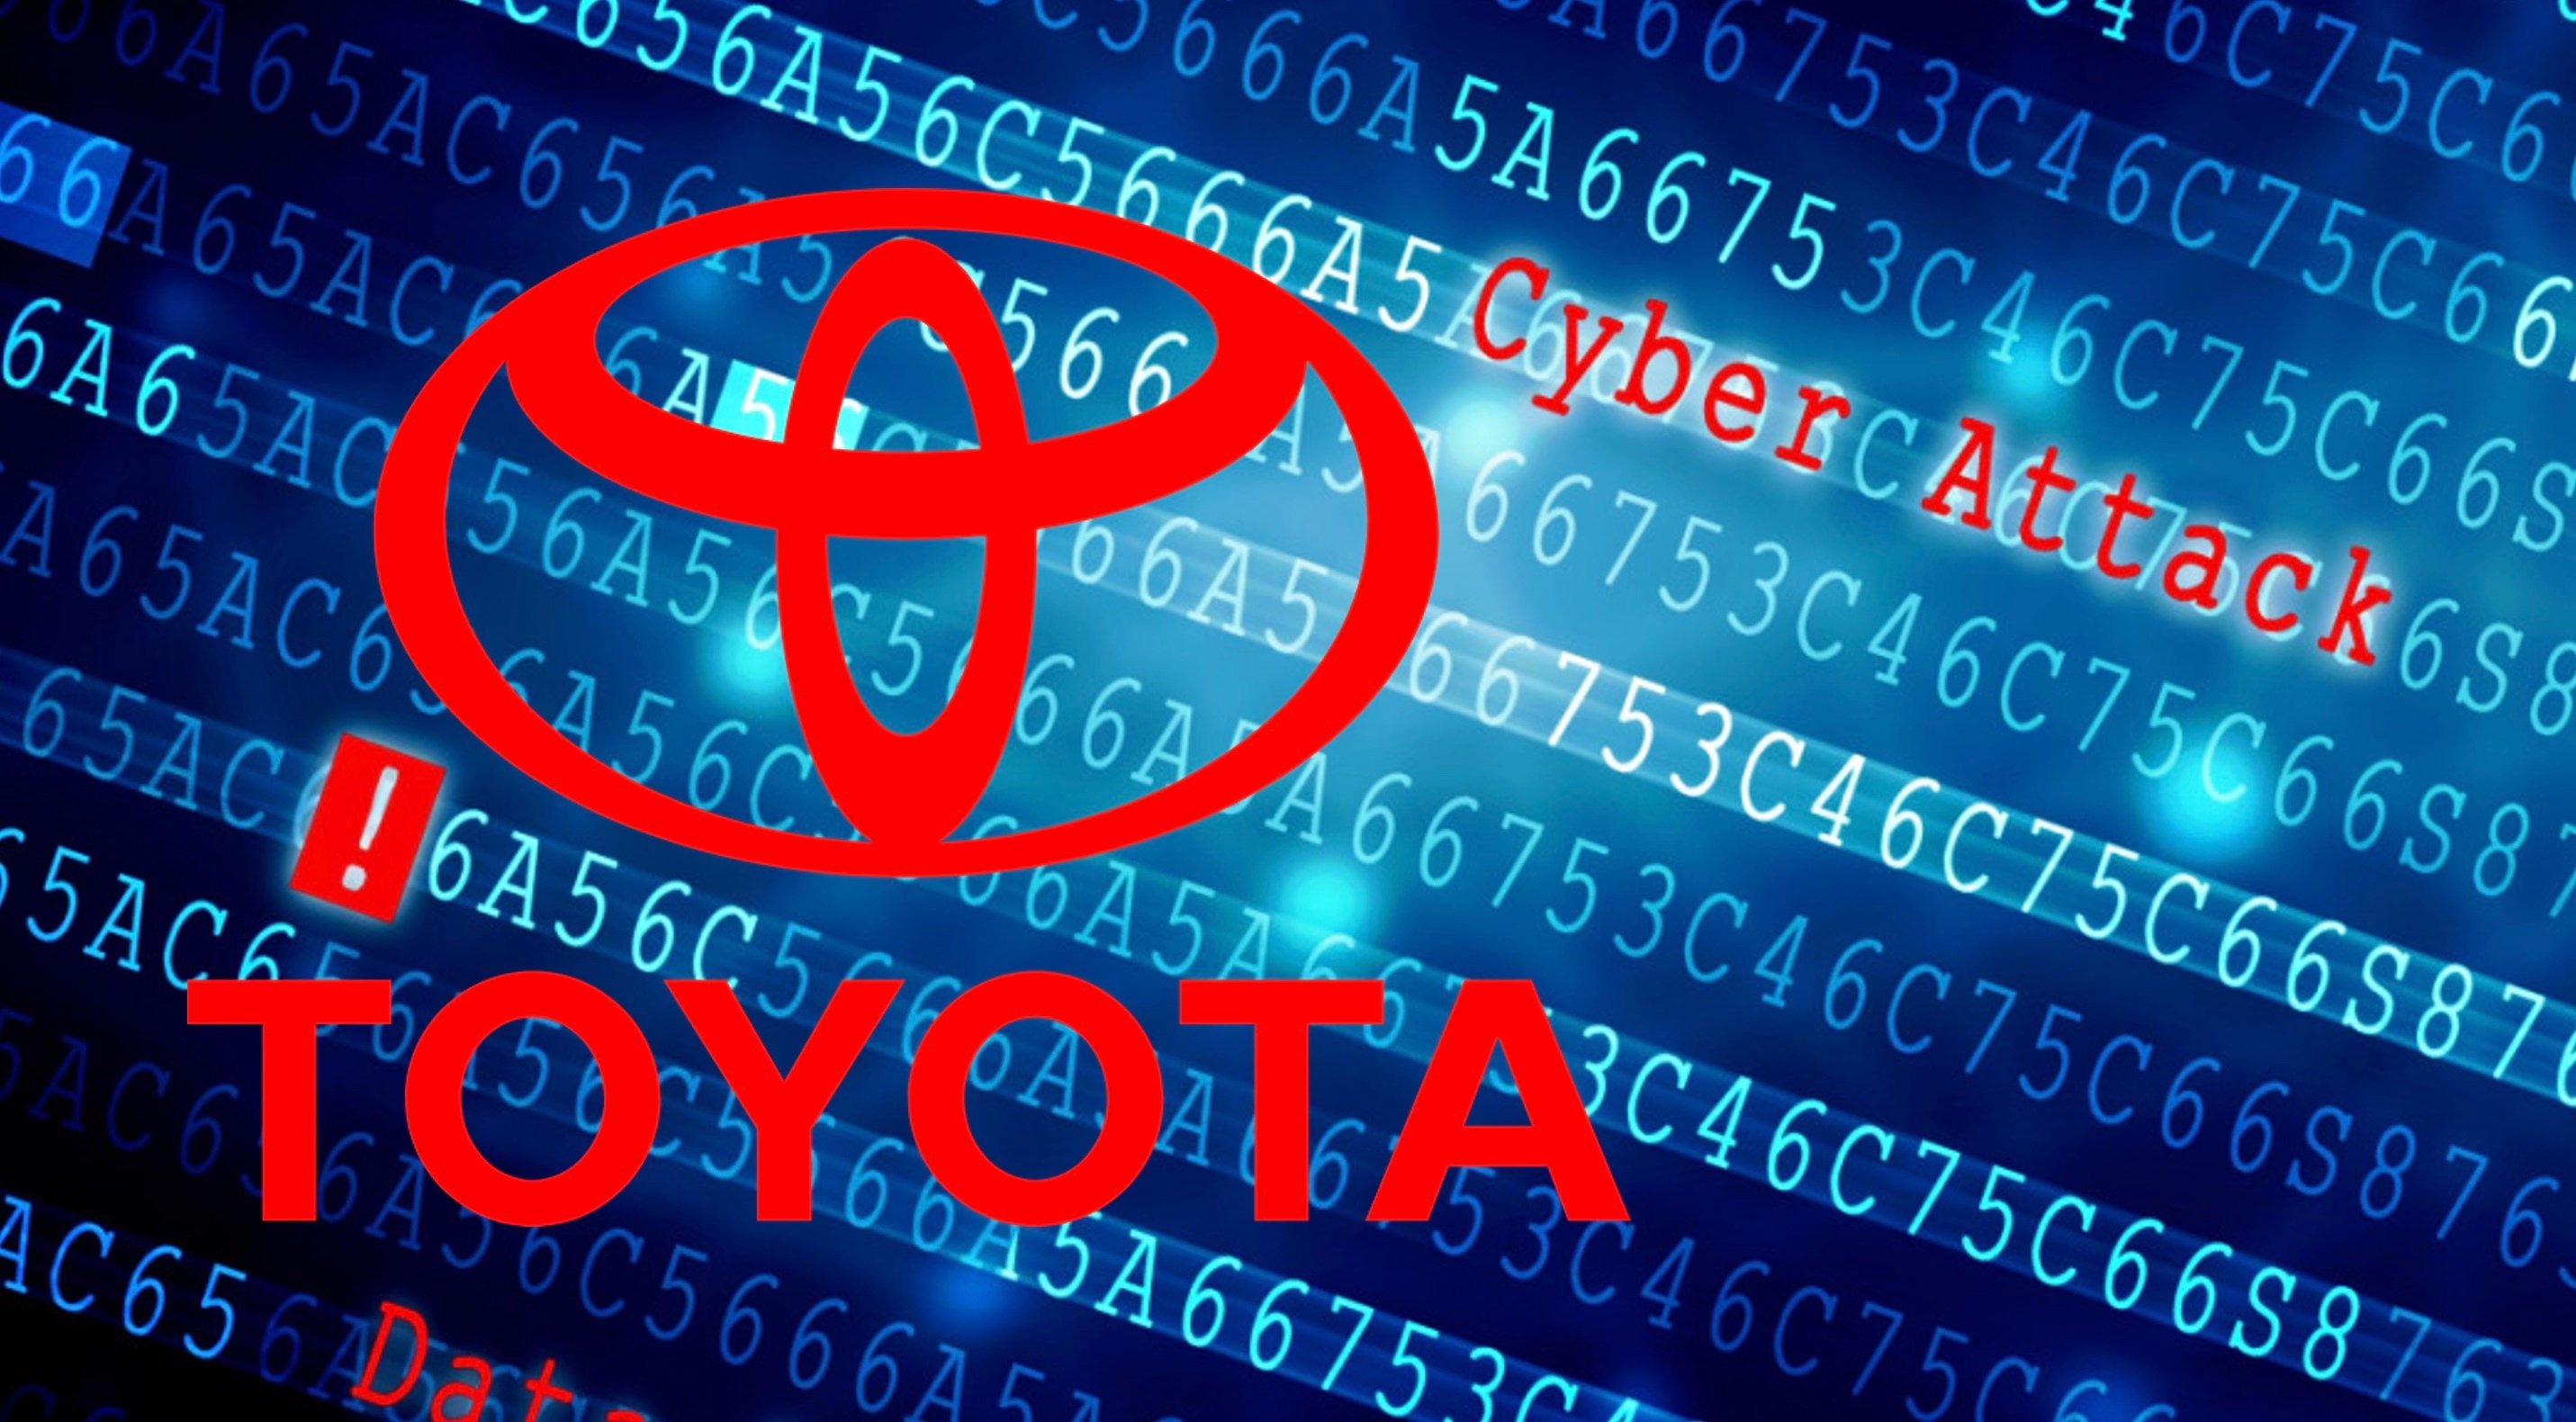 Toyota Customer Data Leaked Due To Software Supply Chain Attack